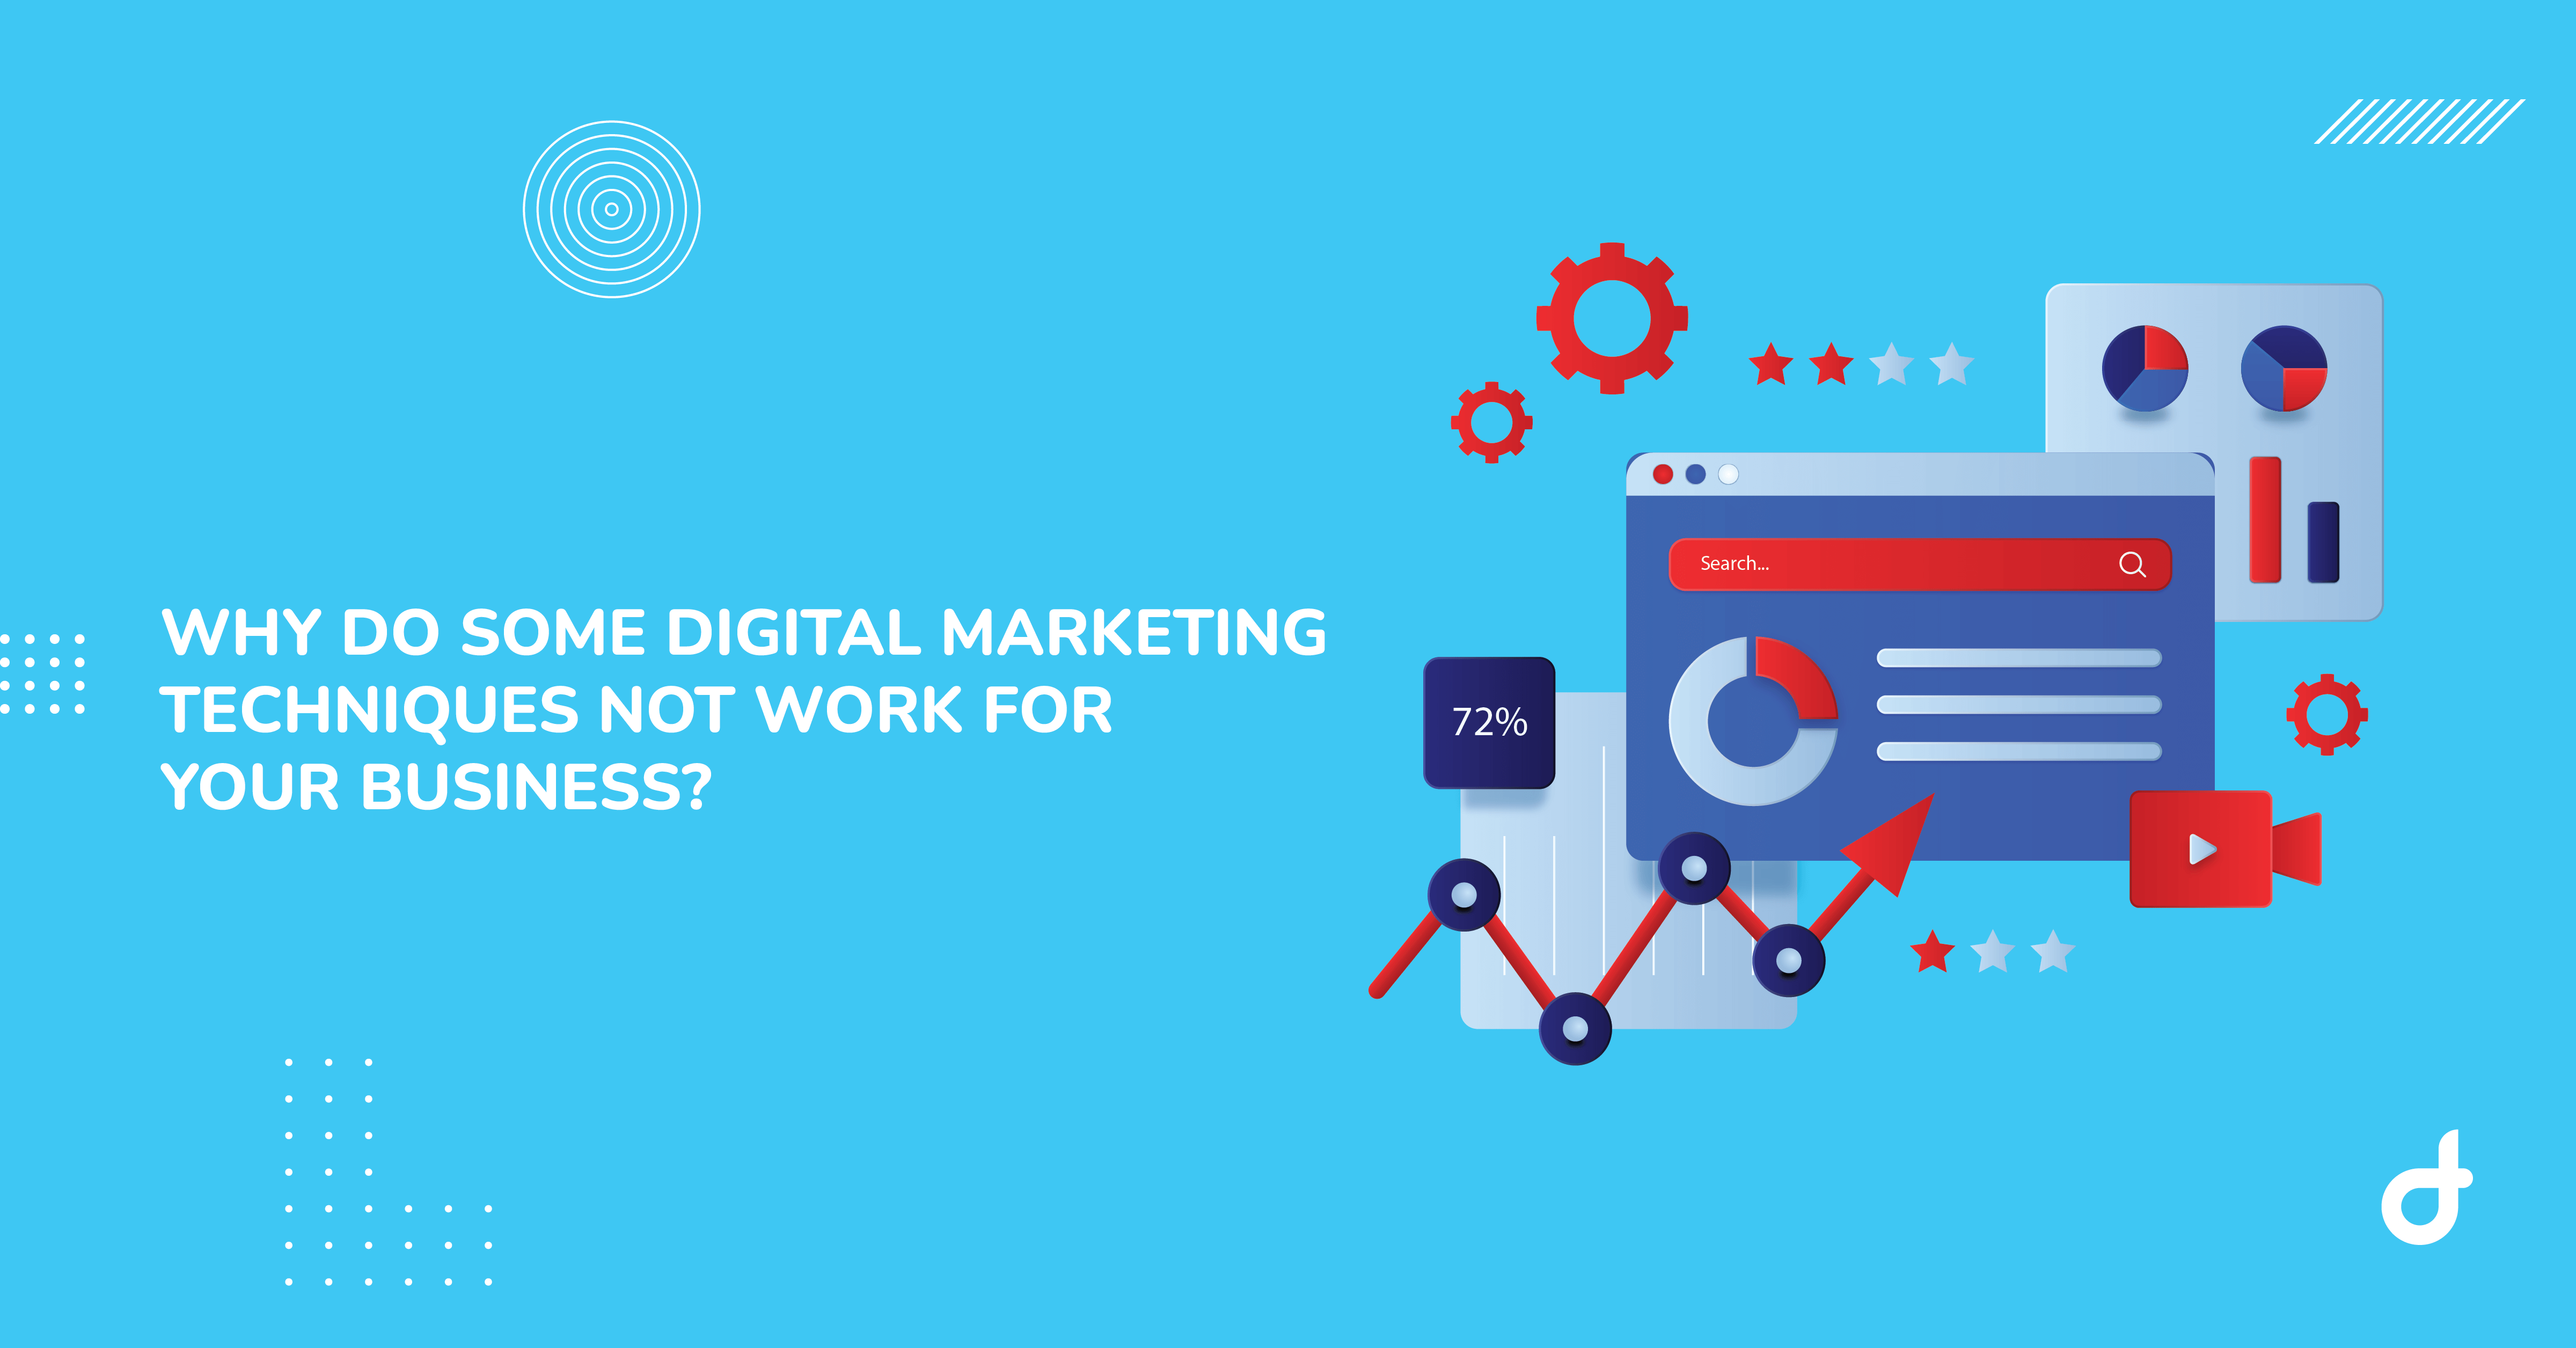 Why do some digital marketing techniques not work for your business